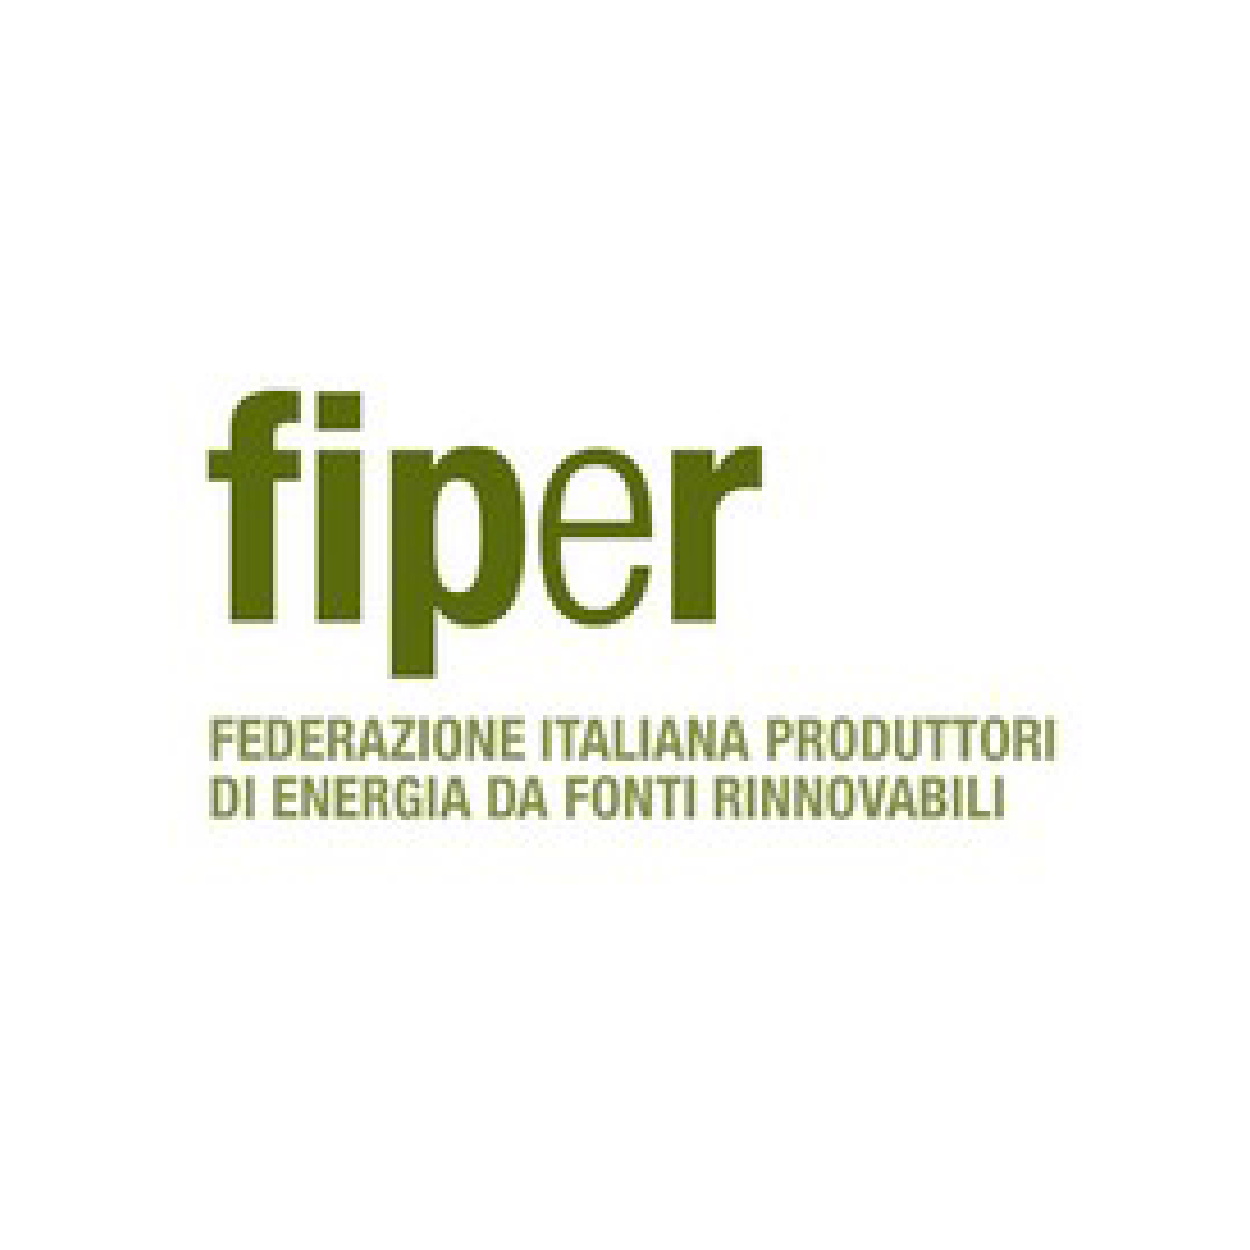 Federation of Italian Producer of Renewable Energy (FIPER)